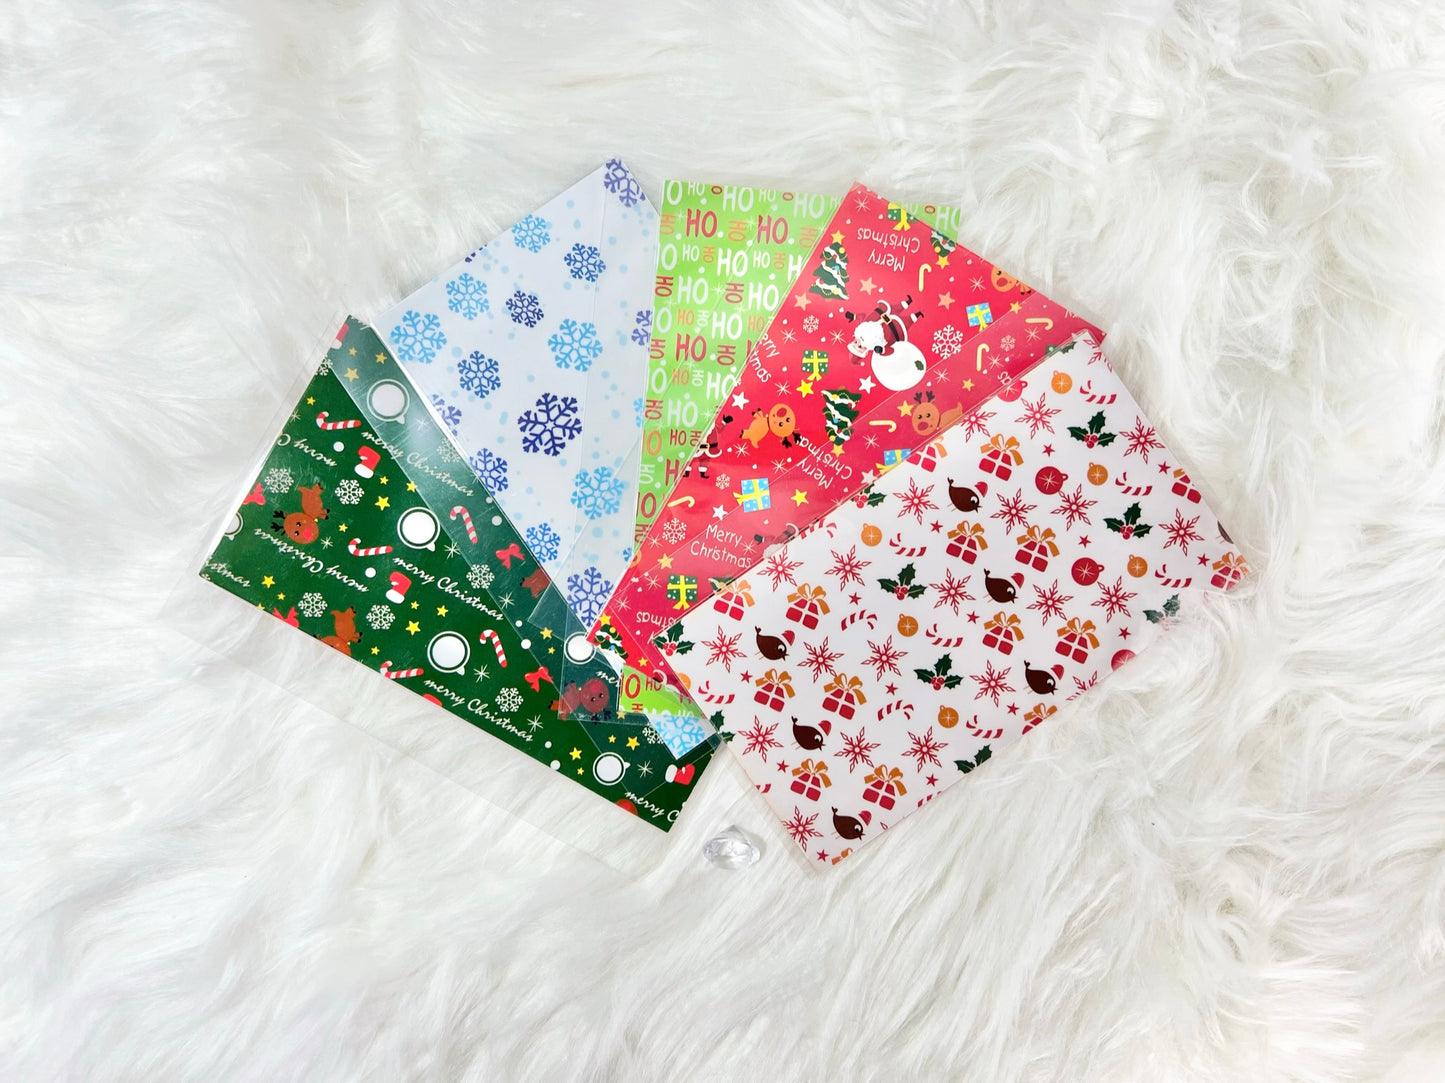 "Tis The Season" Budget Binder Package with Handcrafted Envelopes - Style 2 - A6